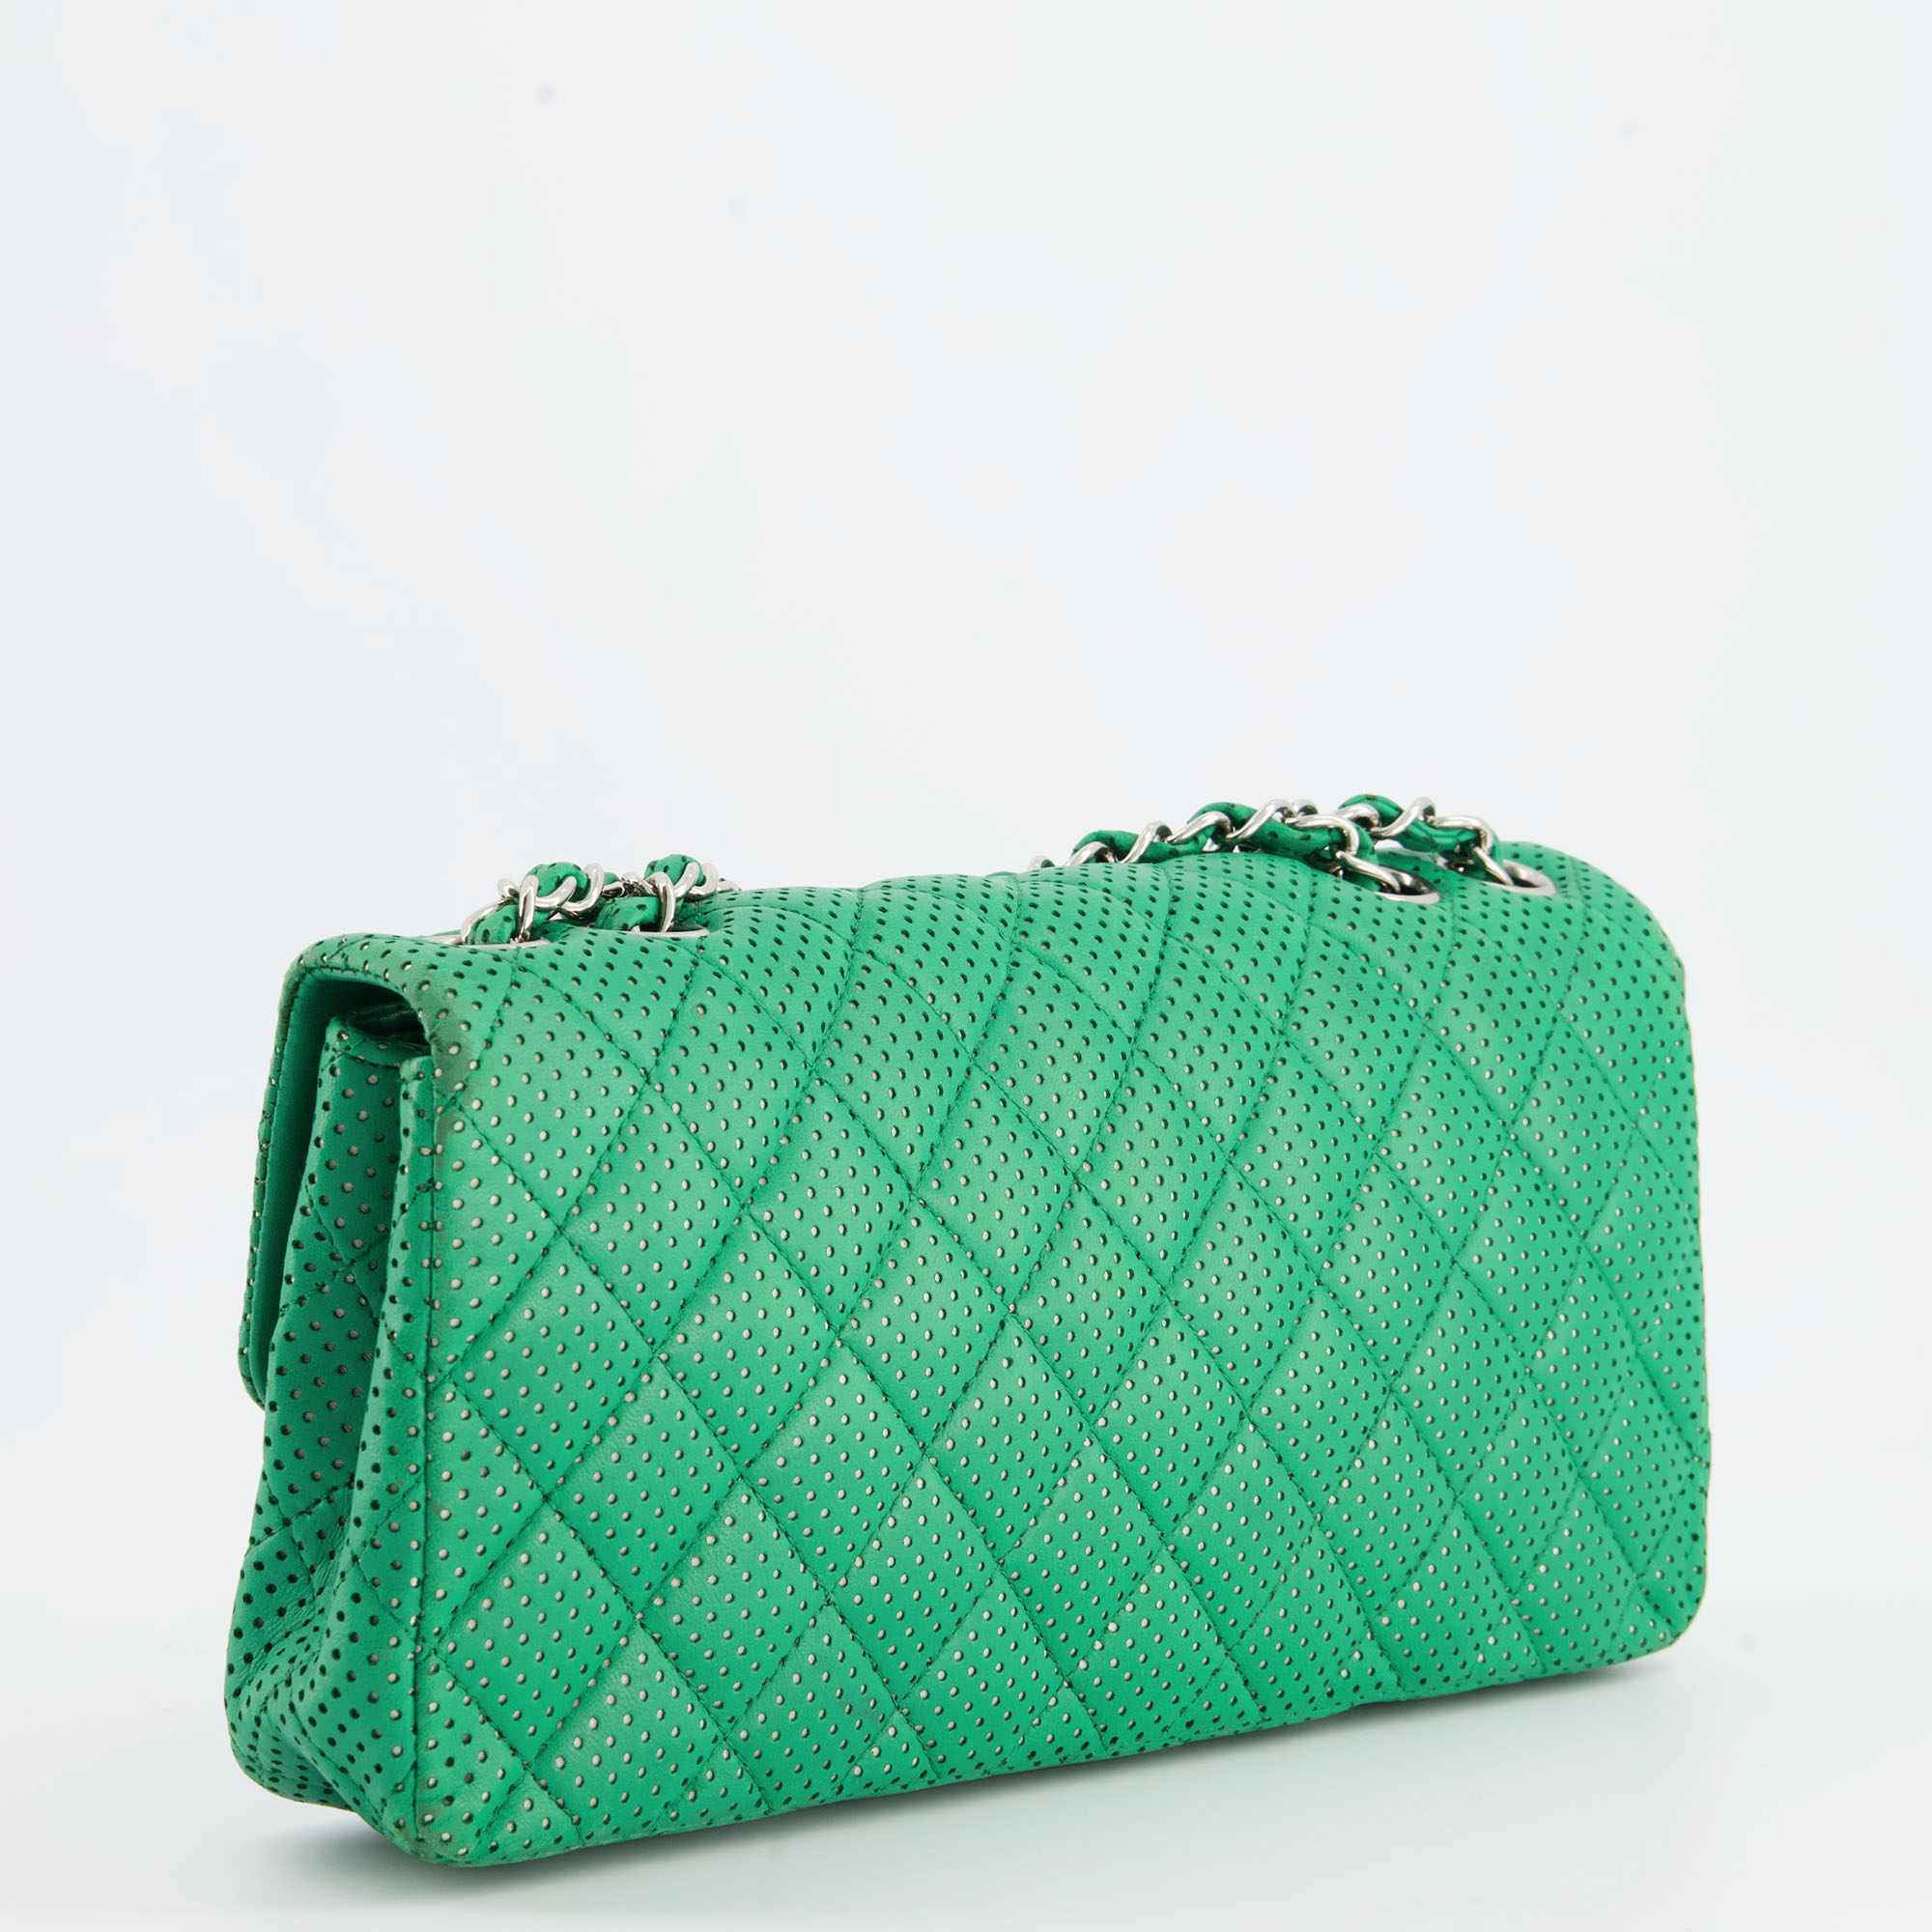 Chanel Green Perforated Lambskin Leather East West Flap Bag With Silver Hardware